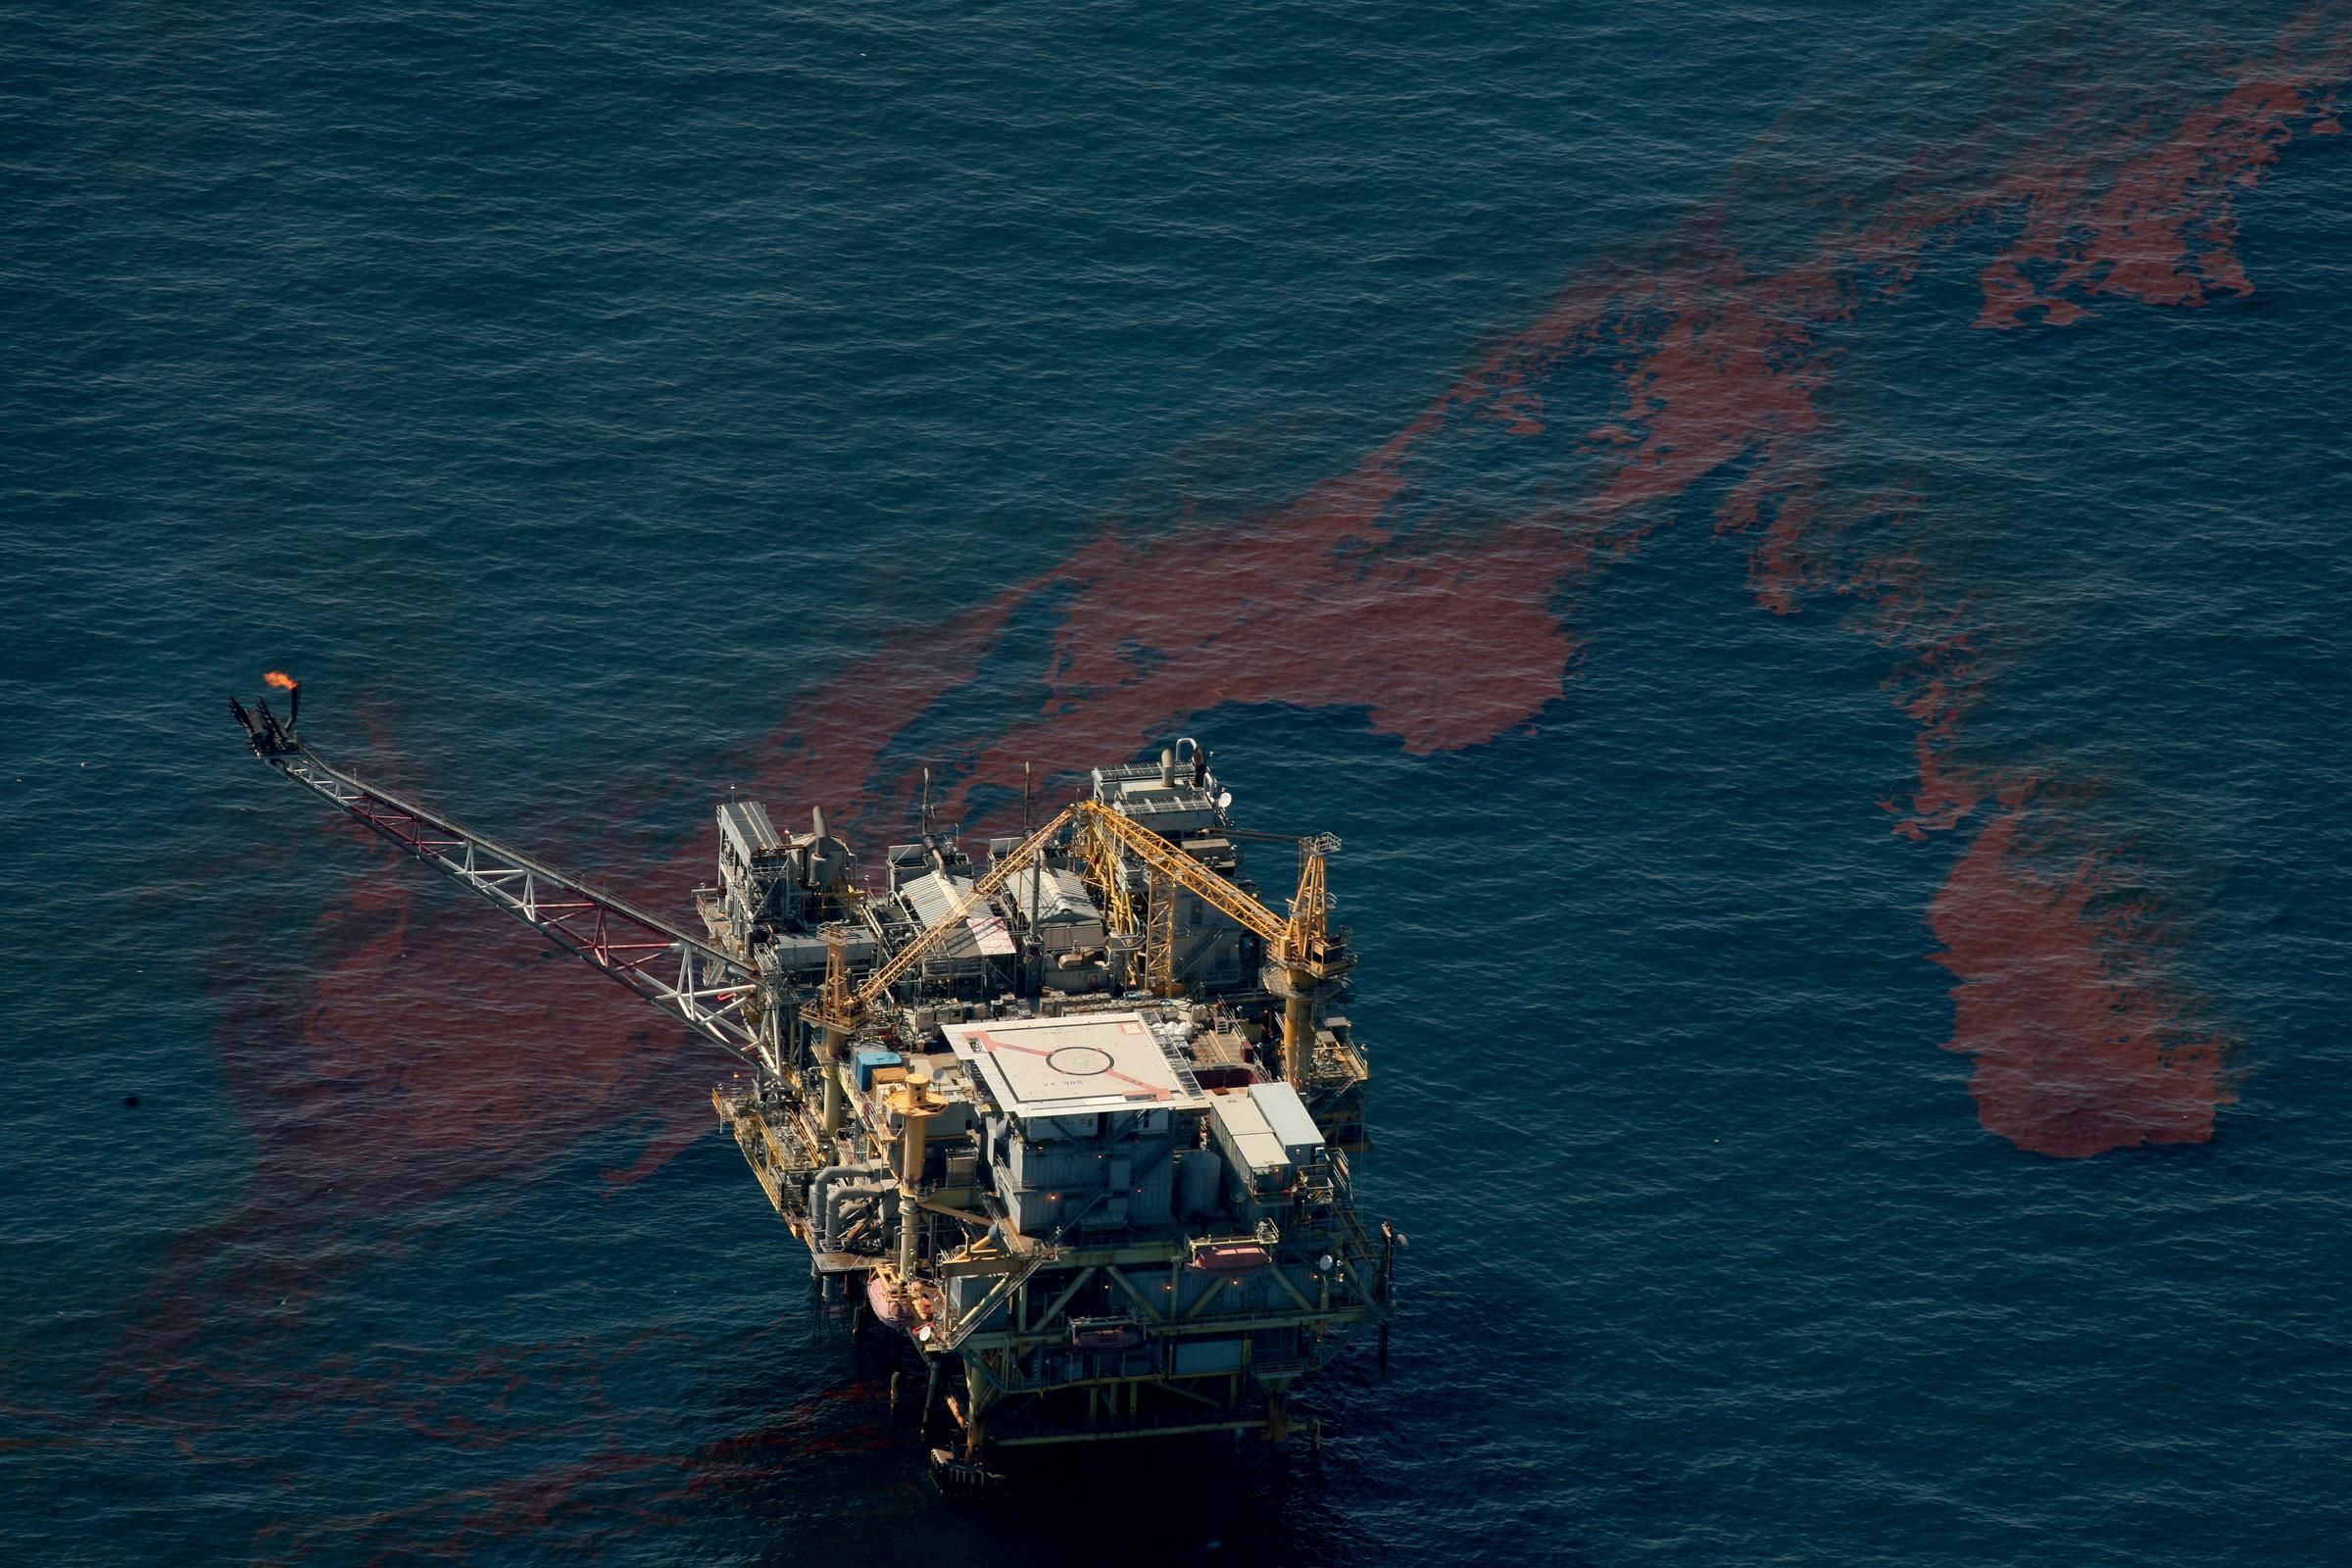 Almost one month after the BP Deepwater Horizon disaster began, oil continued to spread in the Gulf of Mexico on May 17, 2010. (Photo: Carolyn Cole/Los Angeles Times via Getty Images)